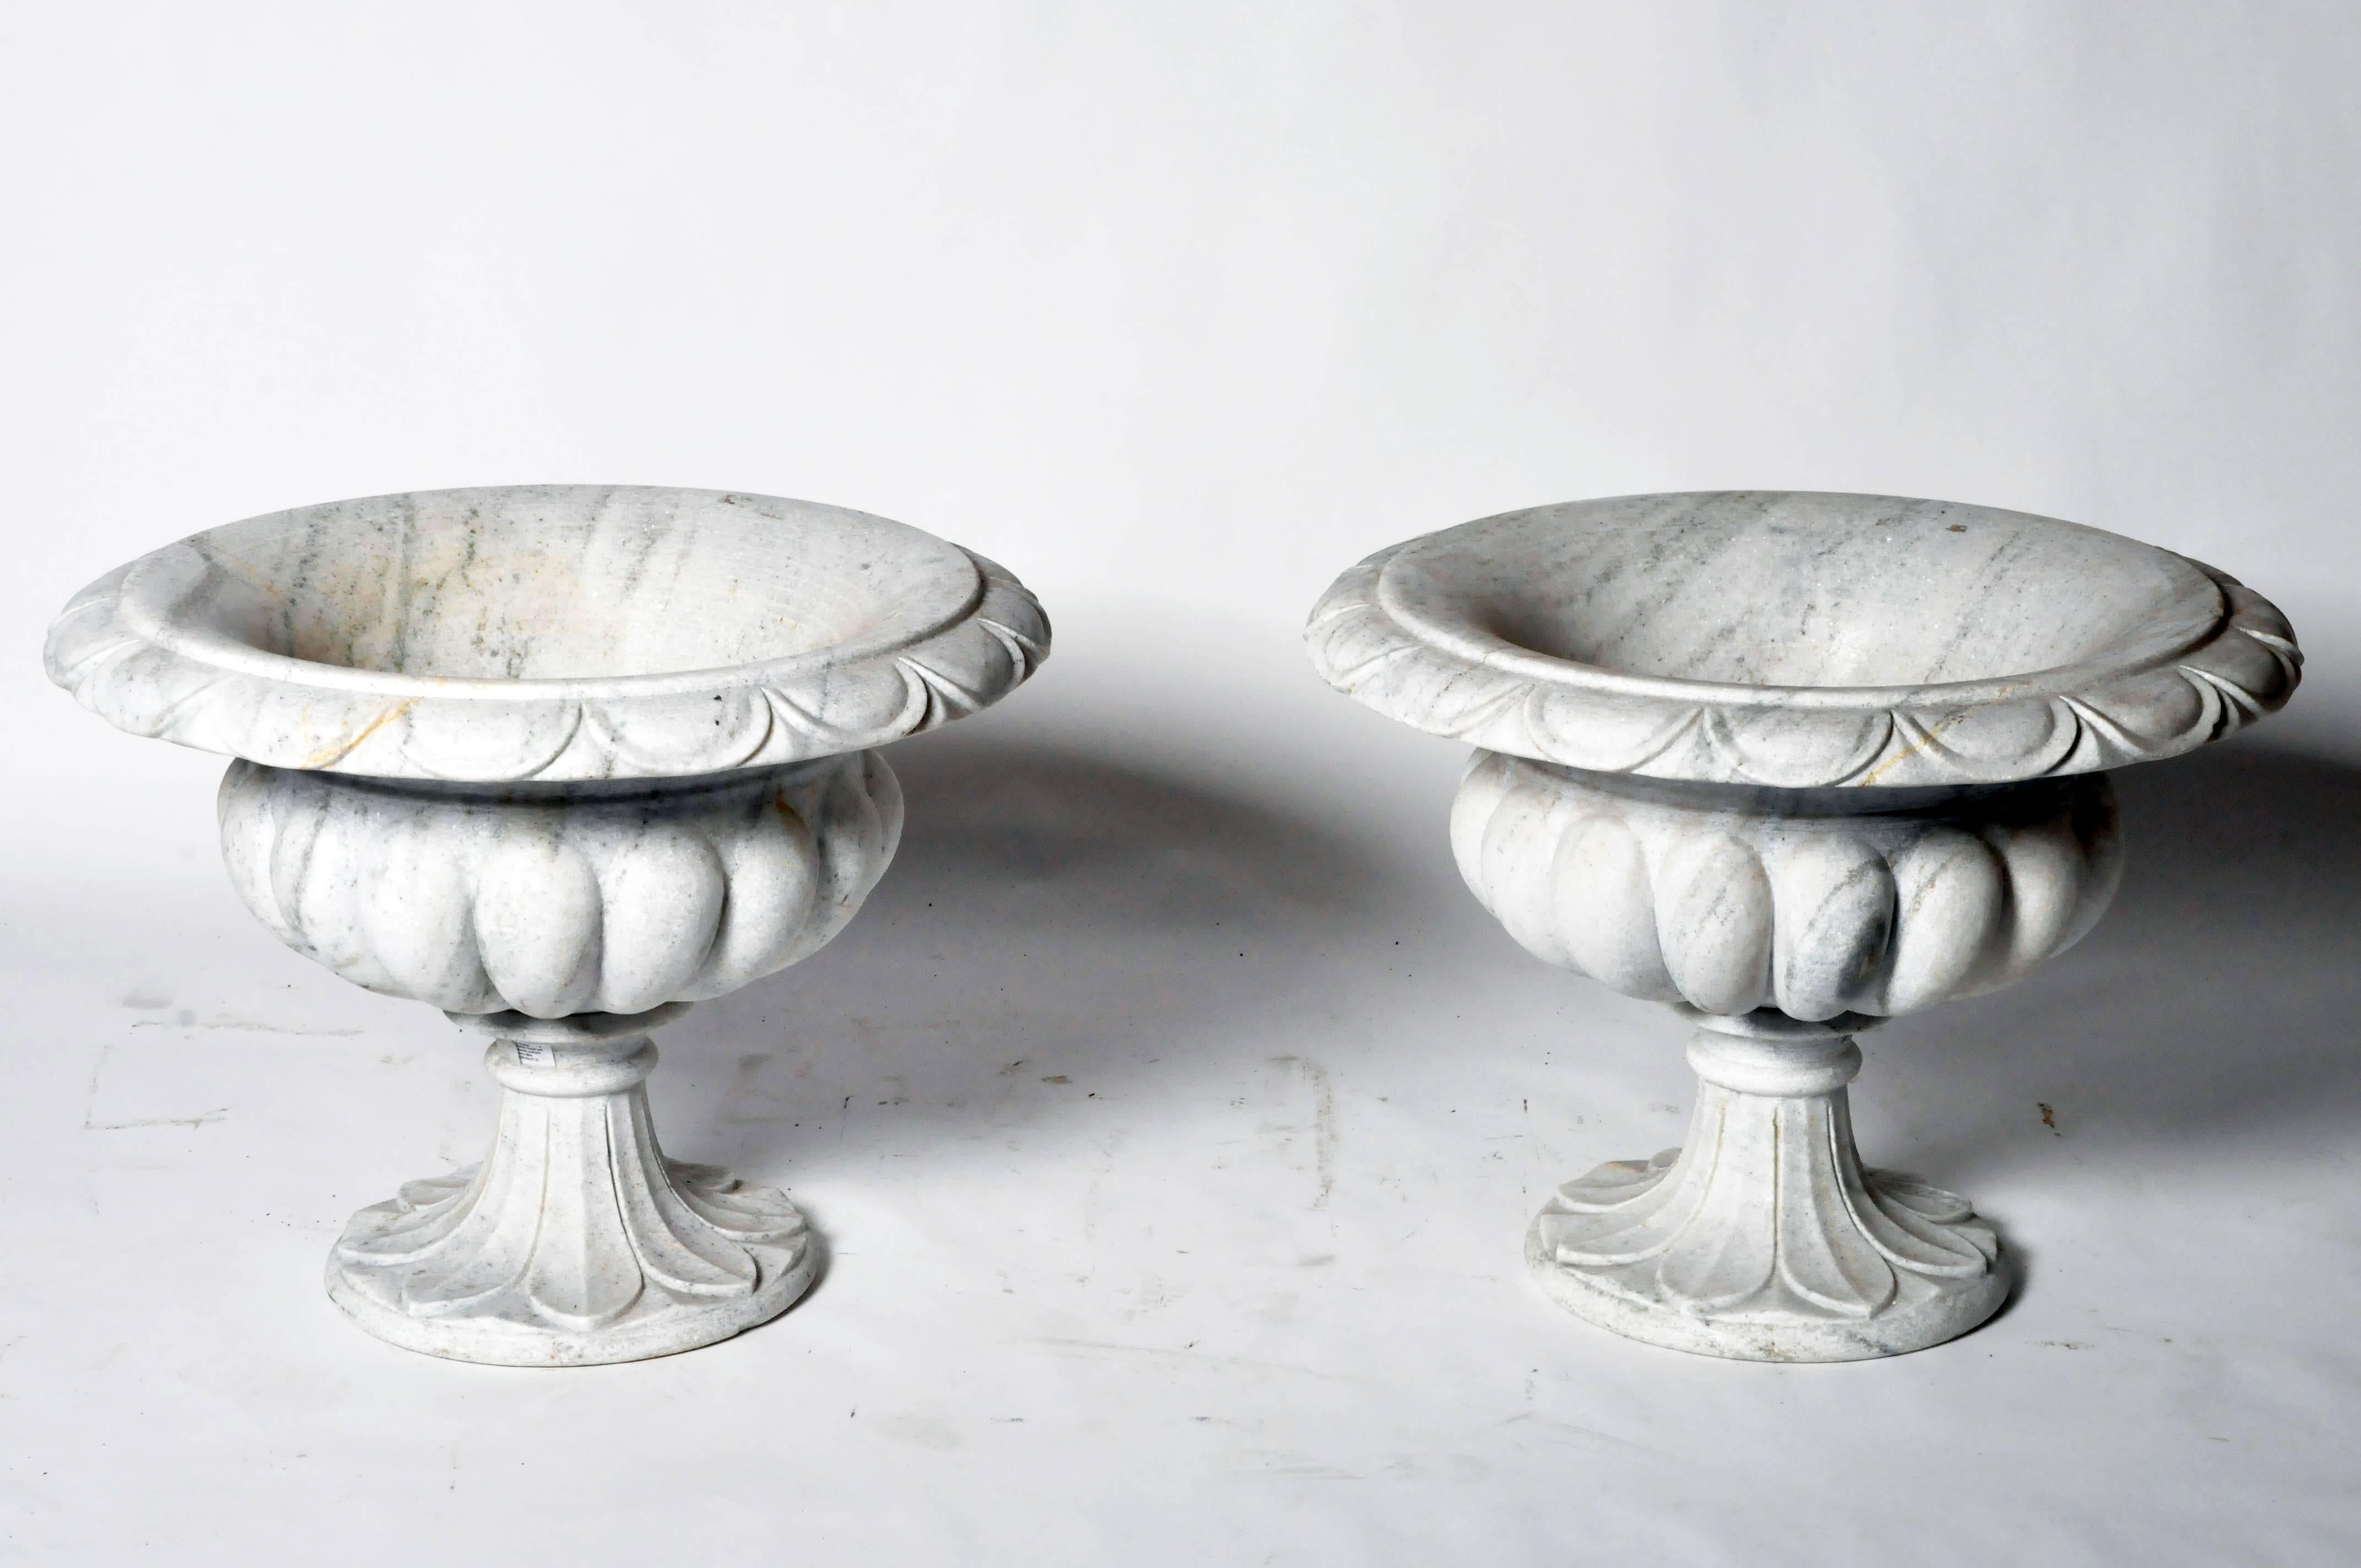 The variegated marble perfectly compliments this shapely urn. It is beautifully carved from the swag-like patterned rim, down through the ribbed body supported by a short, foliate patterned pedestal base. The pair would look exceptional inside or